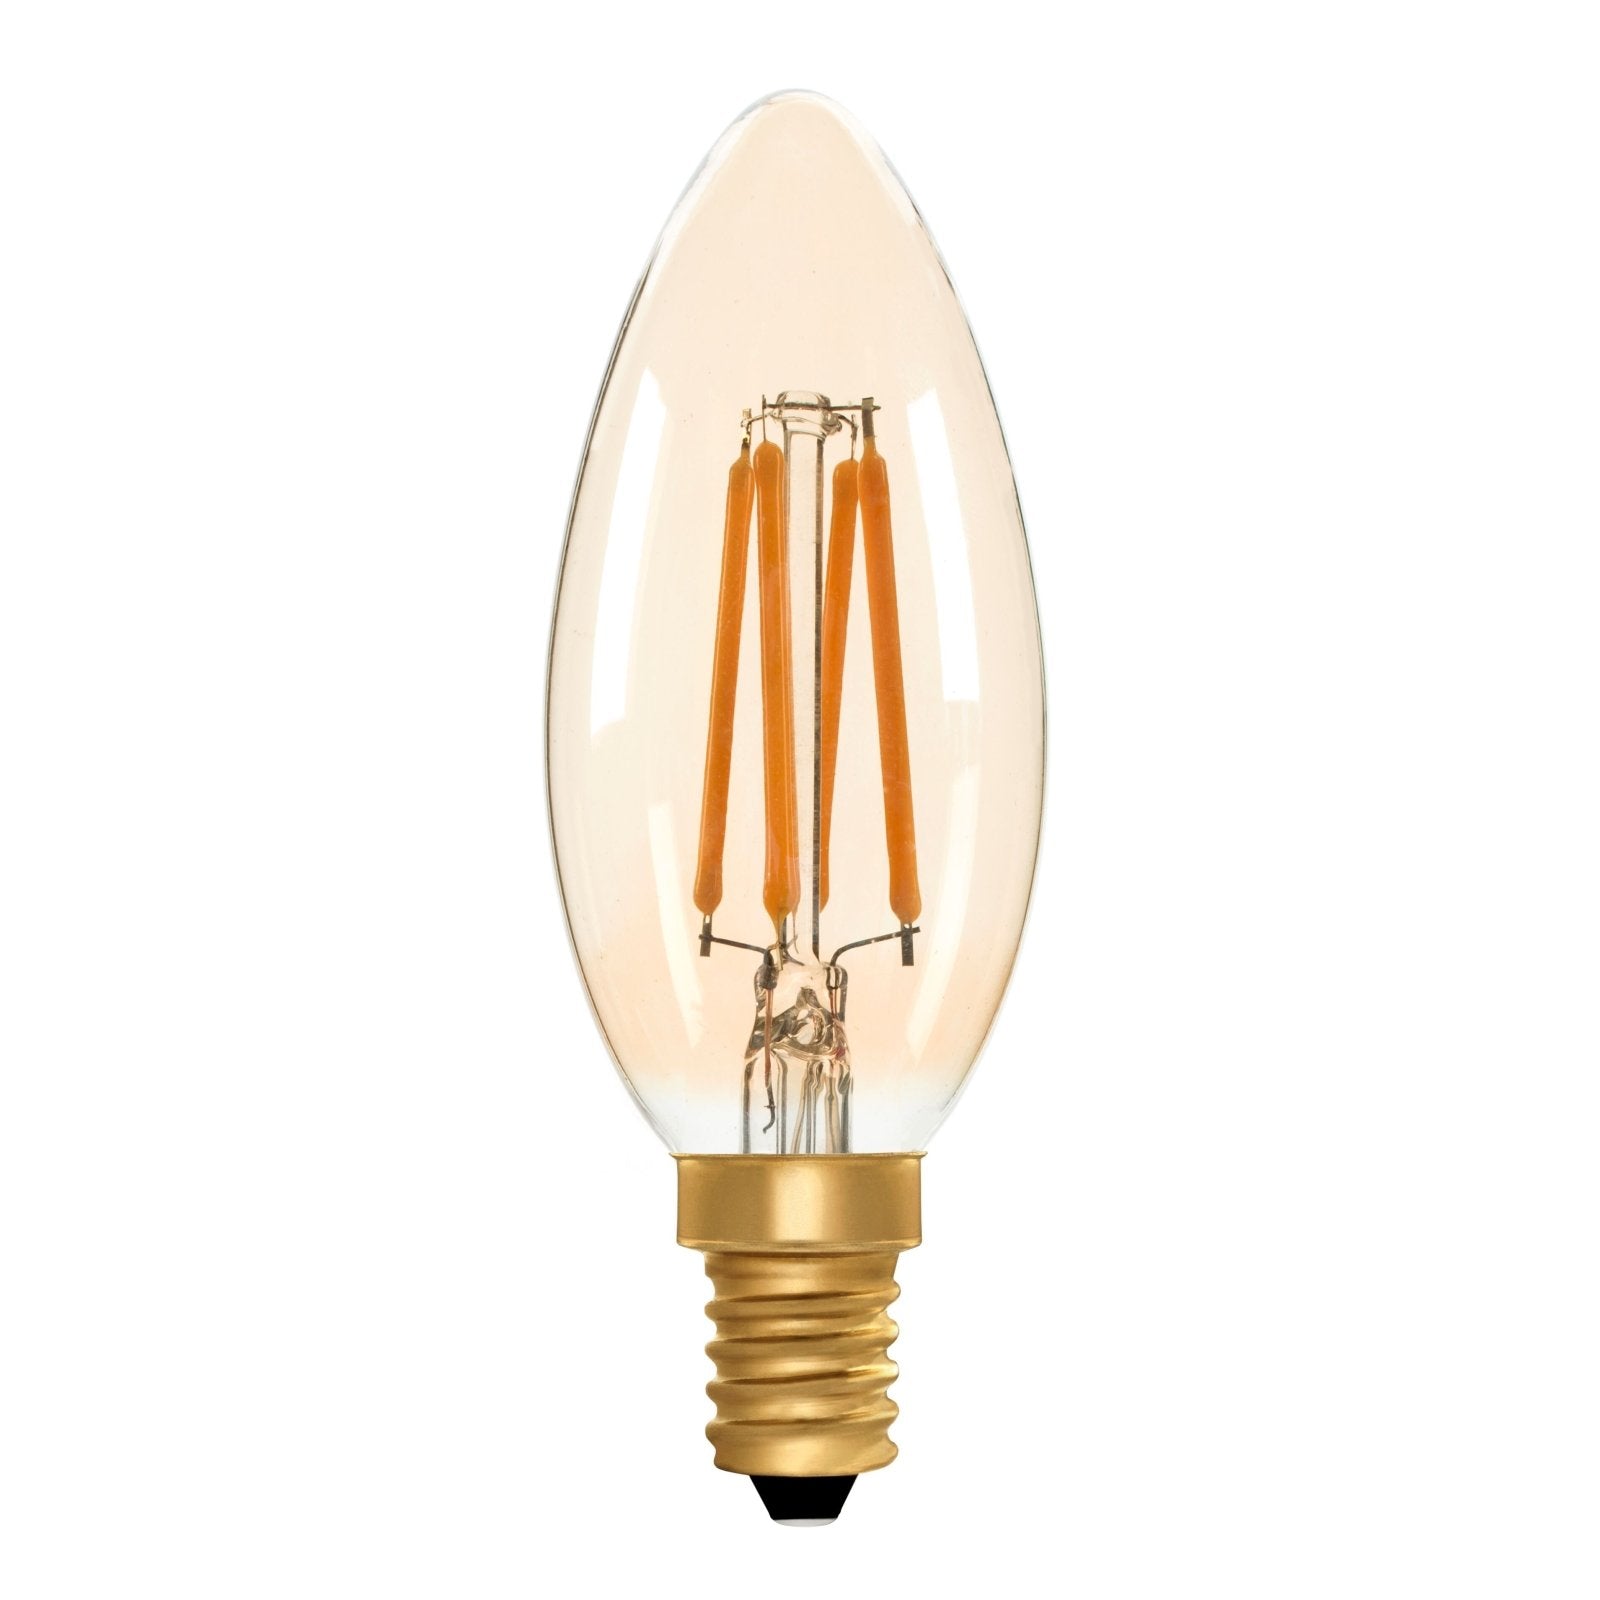 Candle C35 Amber 4W E14 2200K - LED Lamp from RETROLIGHT. Made by Zico Lighting.